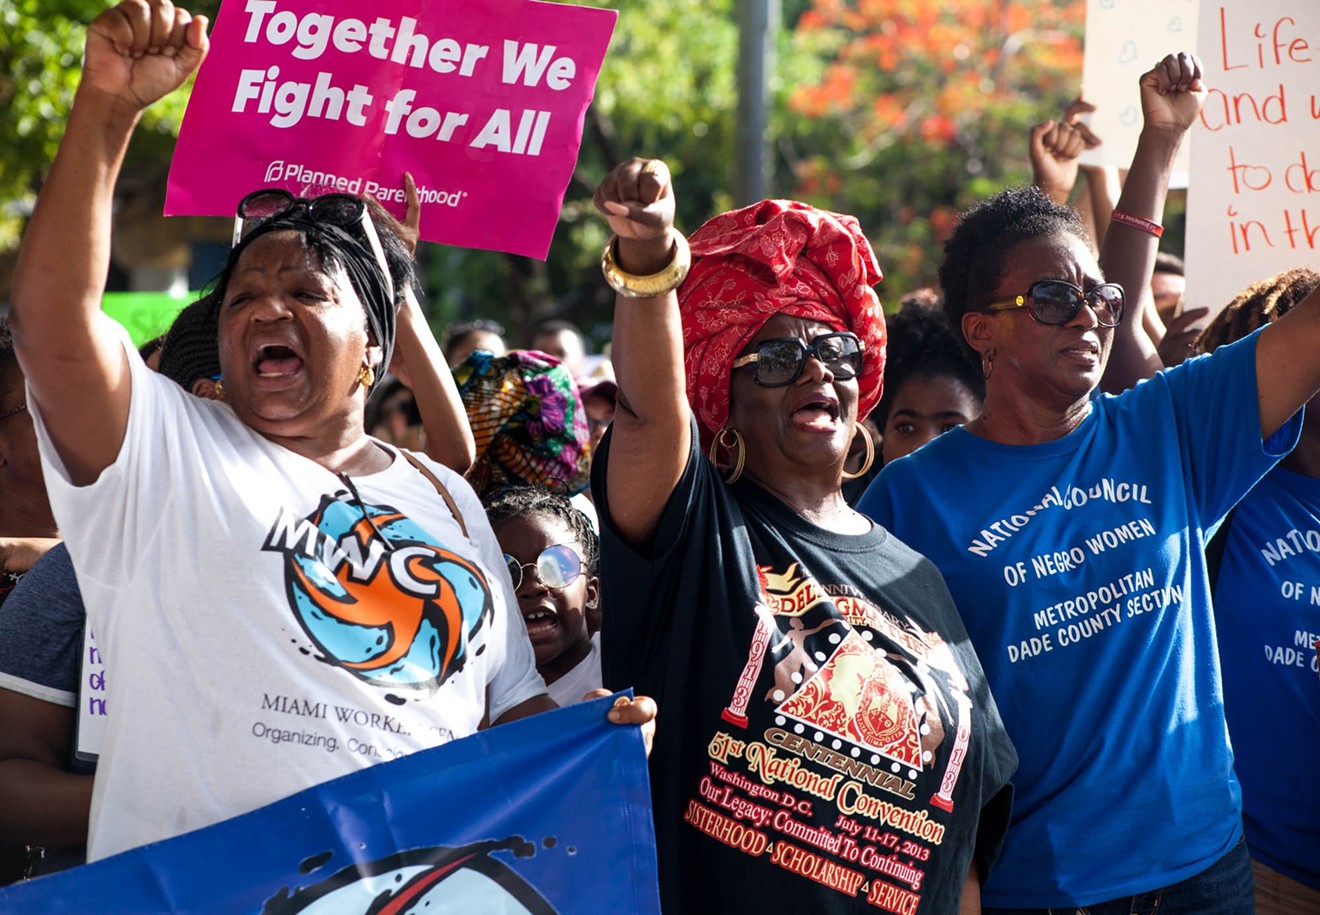 See more photos of the Florida March for Black Women.